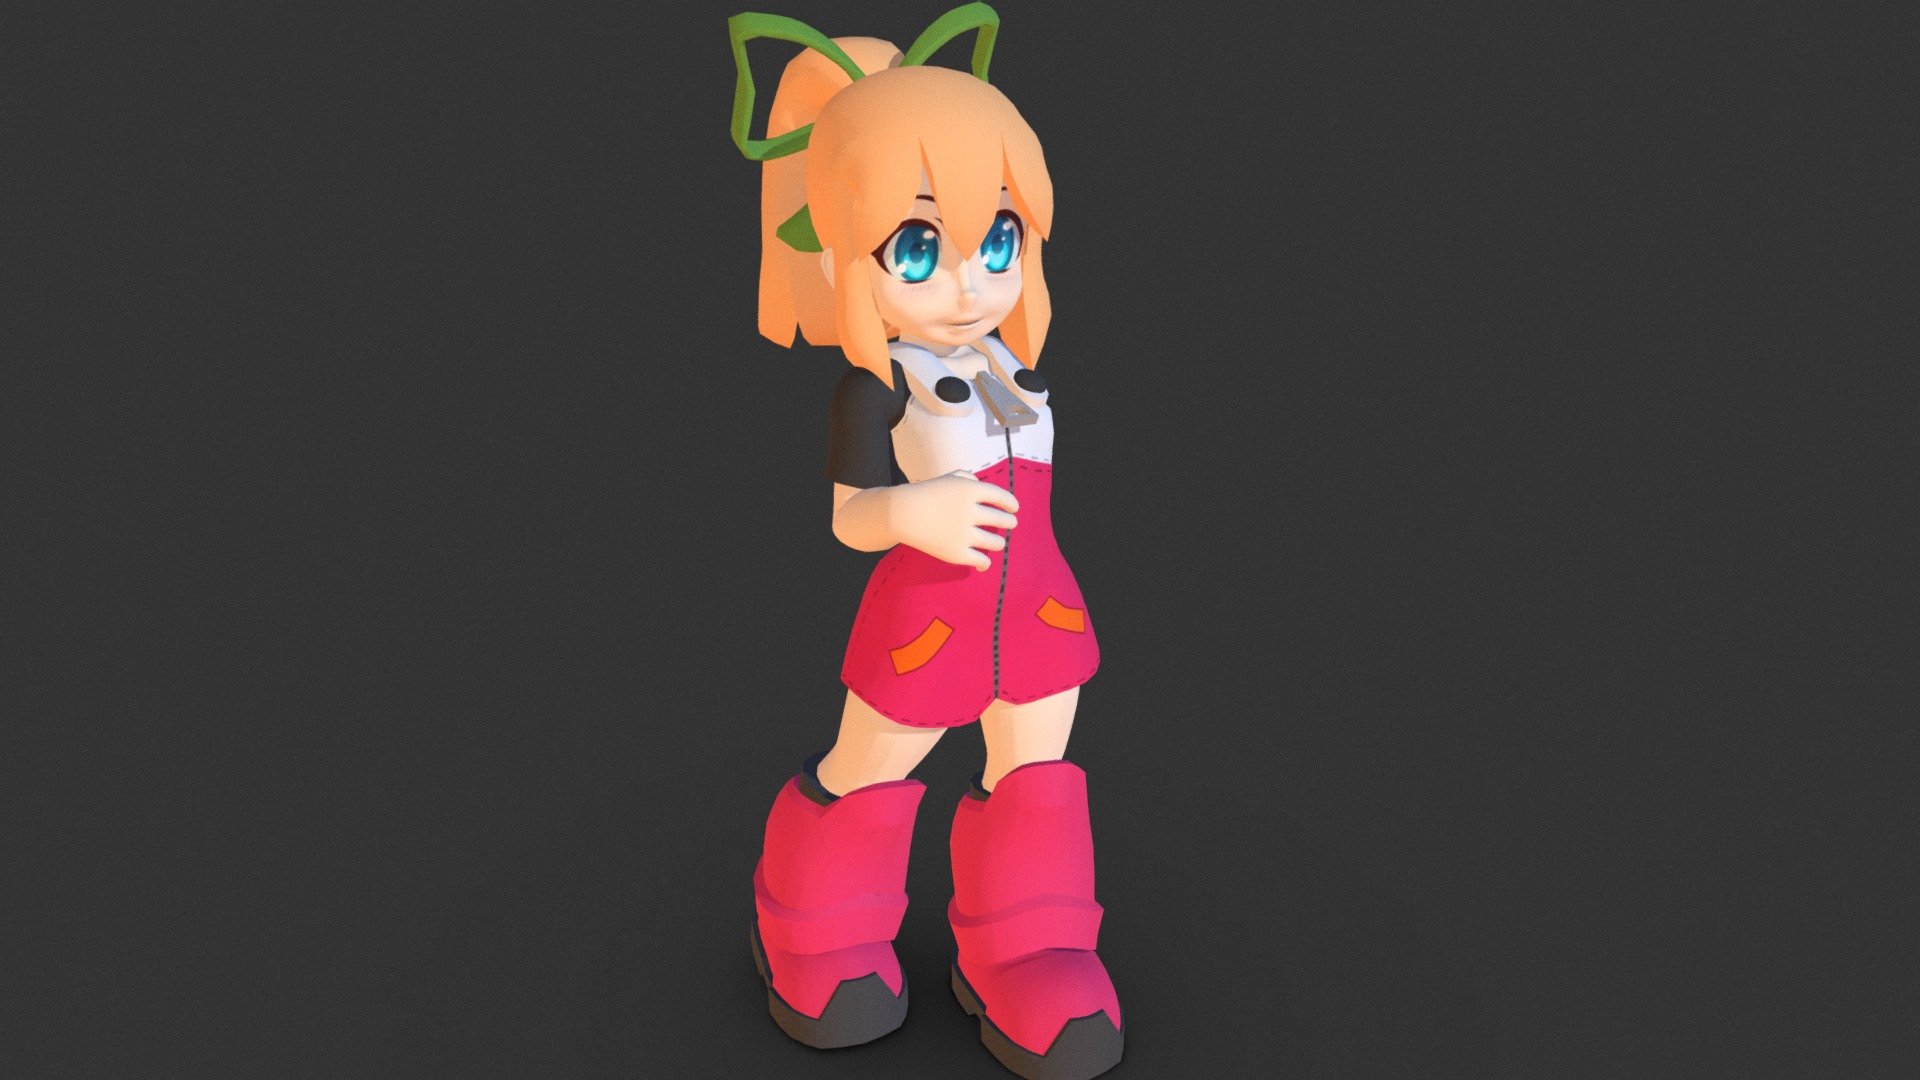 Modeling in Blender, designed for use in Unity3d.

Roll is a character property by Capcom. Copyright © 2017 Capcom. All rights reserved 3d model